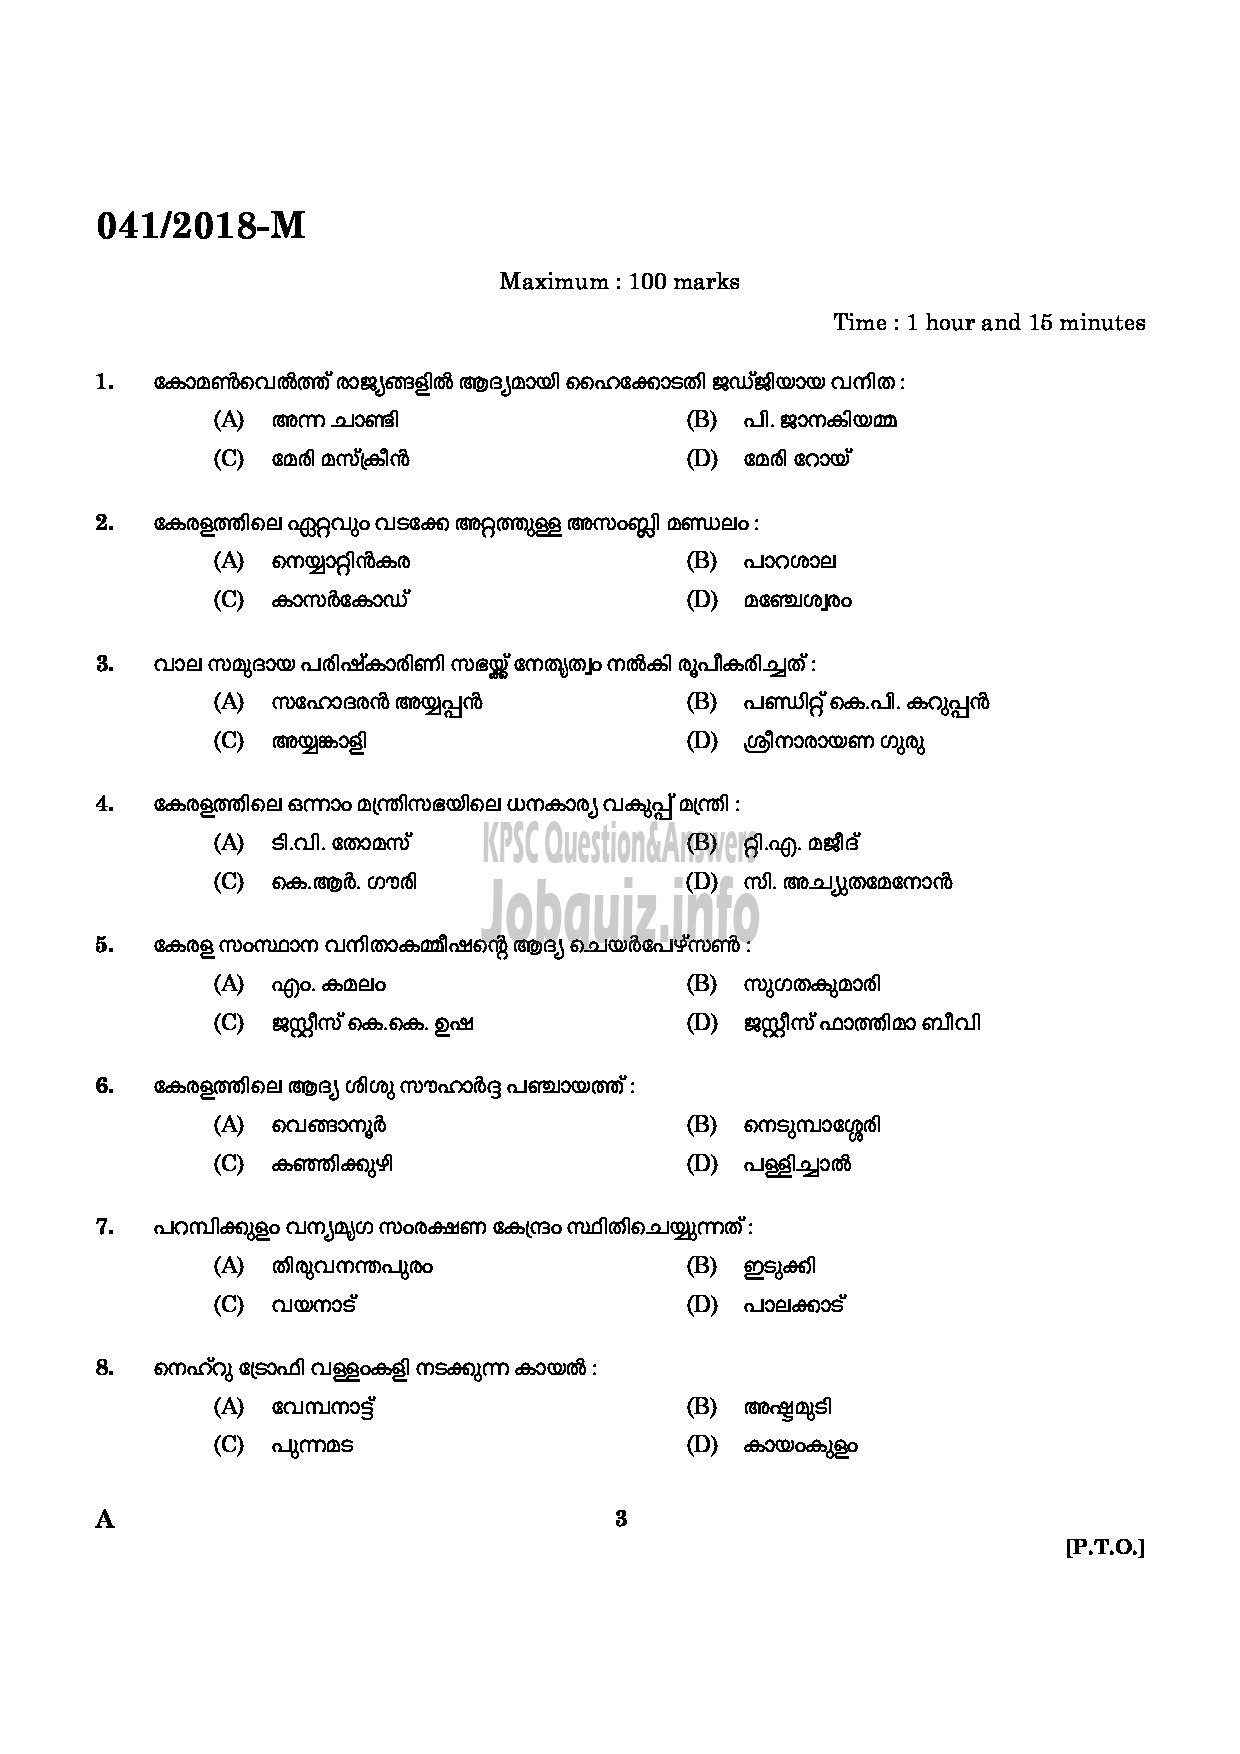 Kerala PSC Question Paper - WOMEN POLICE CONSTABLE NCA LC/AI AND MUSLIM POLICE MALAYALAM-1